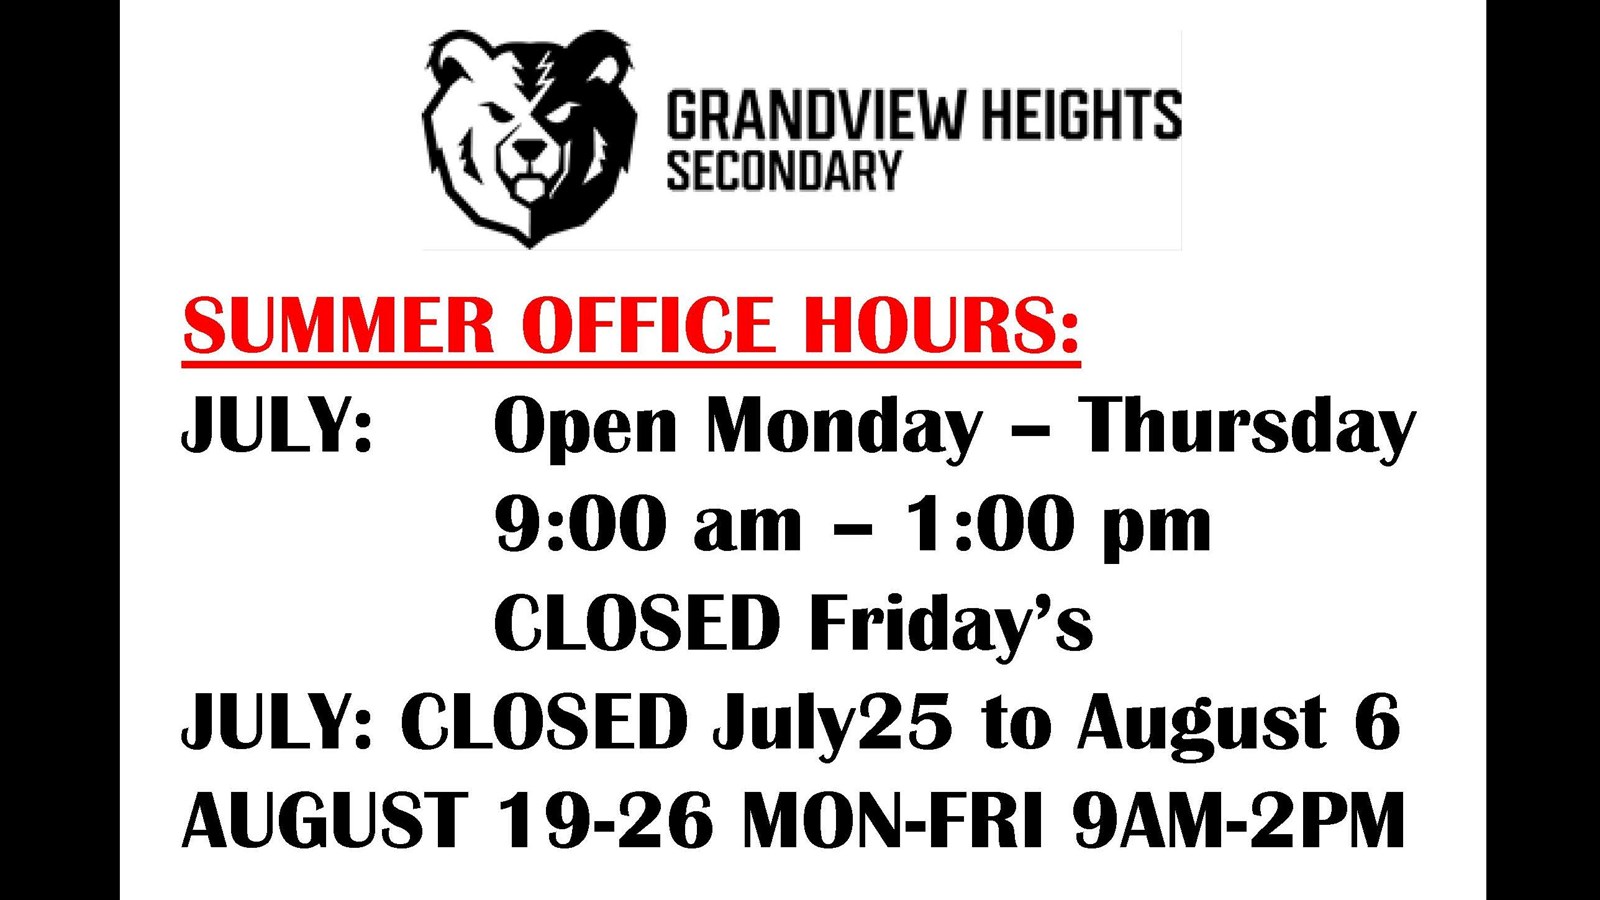 Summer Office Hours 